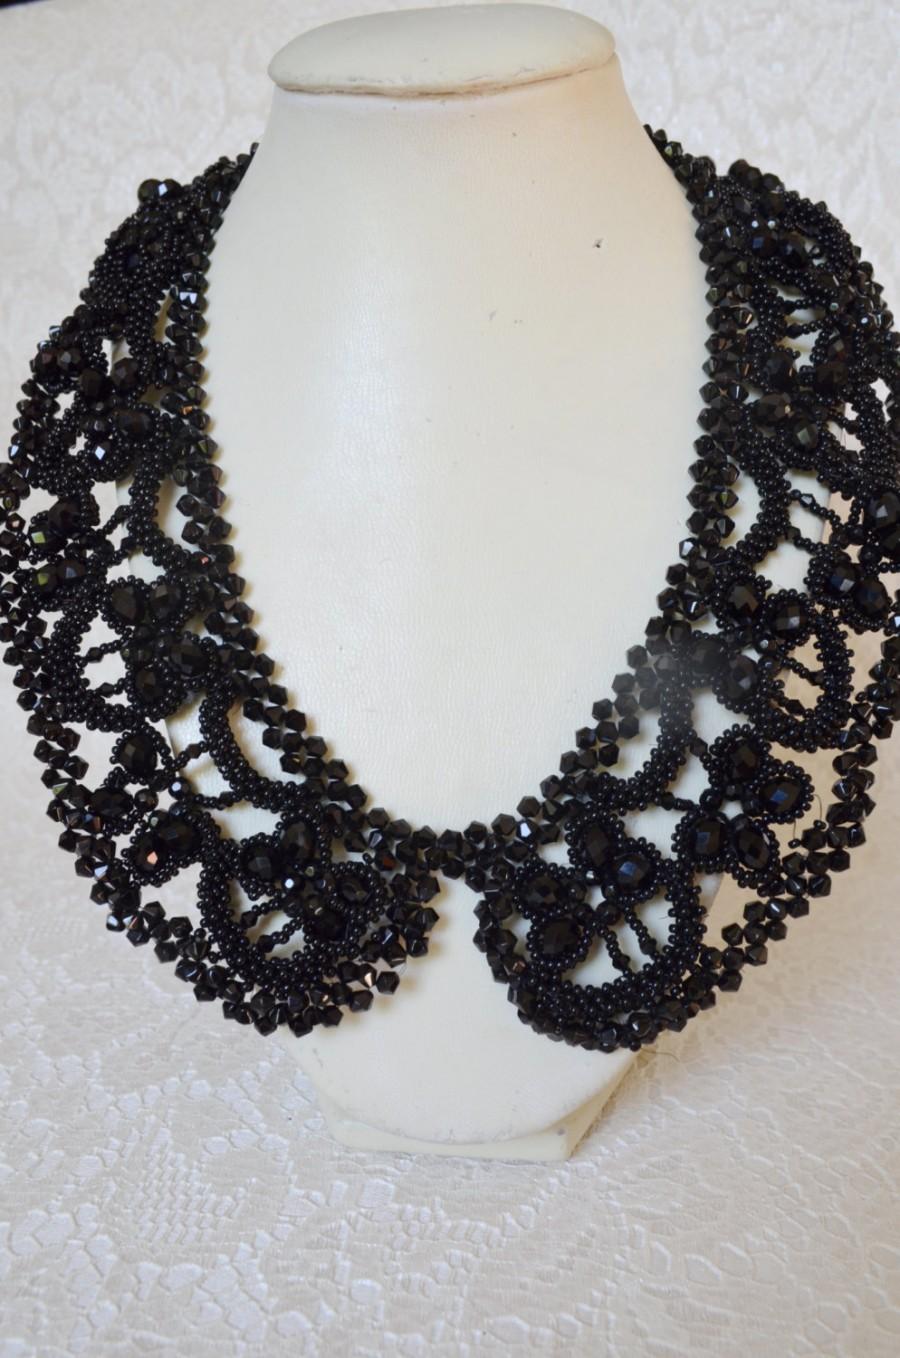 Mariage - Black Statement Collar Necklace, Beaded Necklace, Seed Bead Necklace, Beading Necklace, Holiday Necklace, Beadwoven, Gift for Her